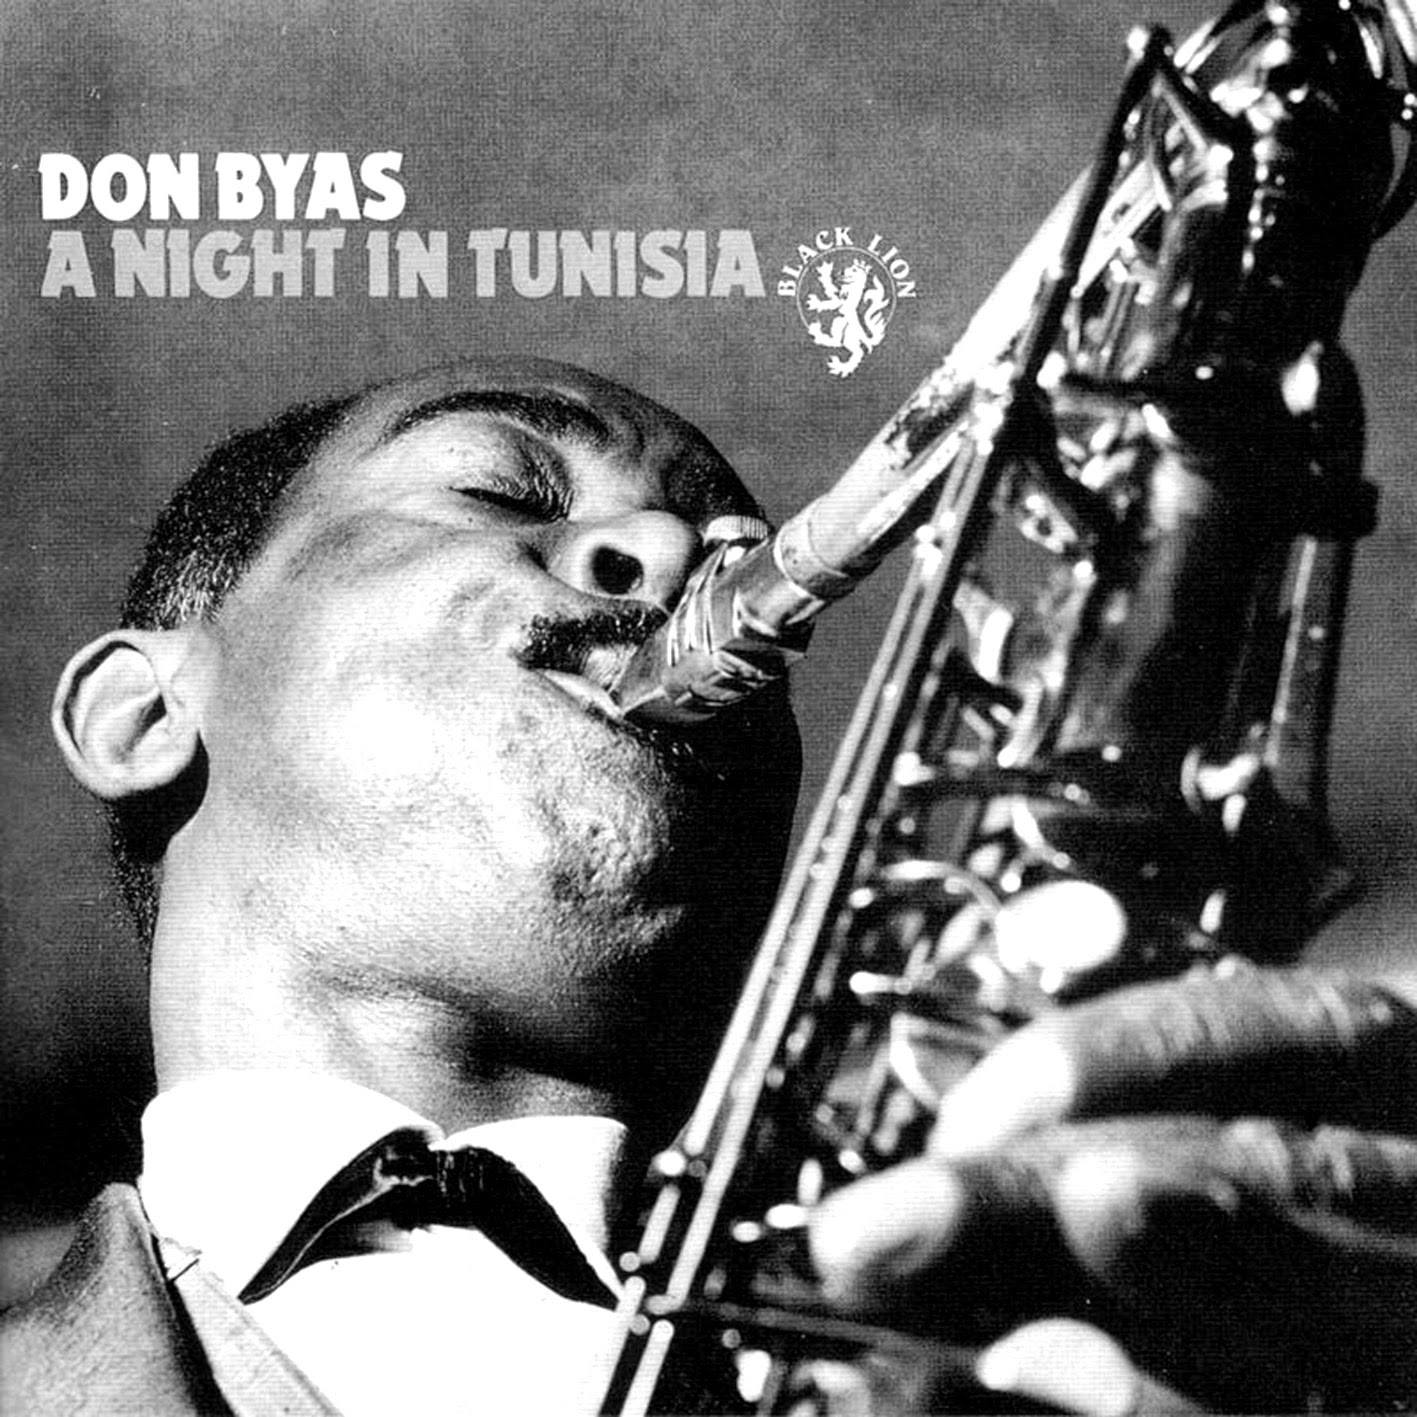 DON BYAS - A Night in Tunisia cover 